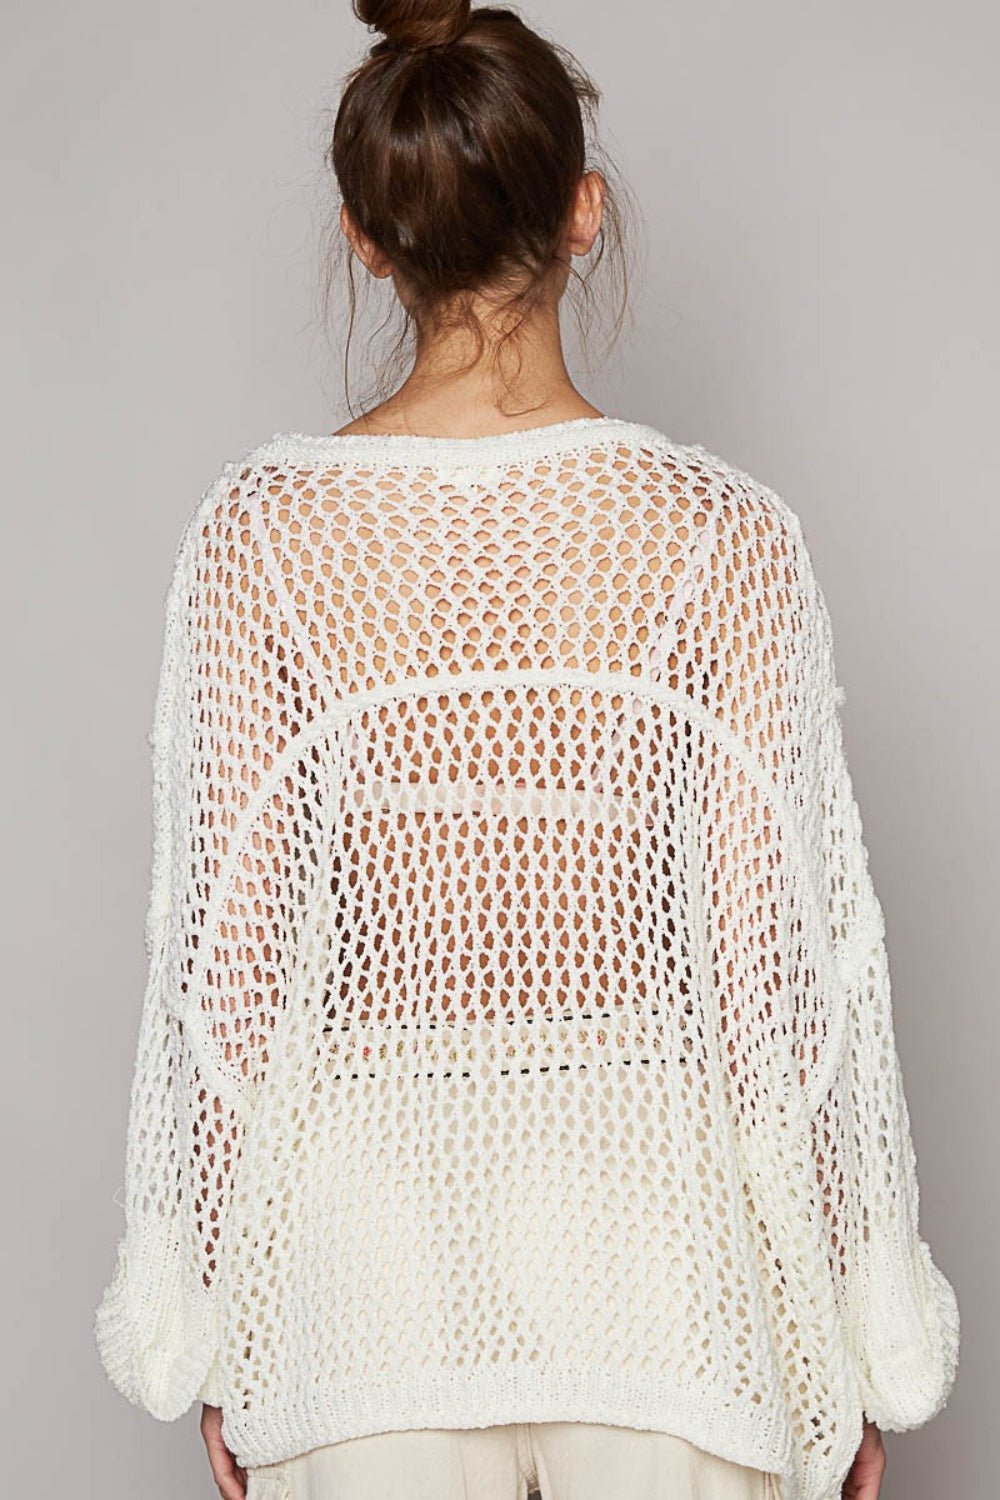 Openwork Long Sleeve Knit Cover Up Top in Pure WhiteTopPOL